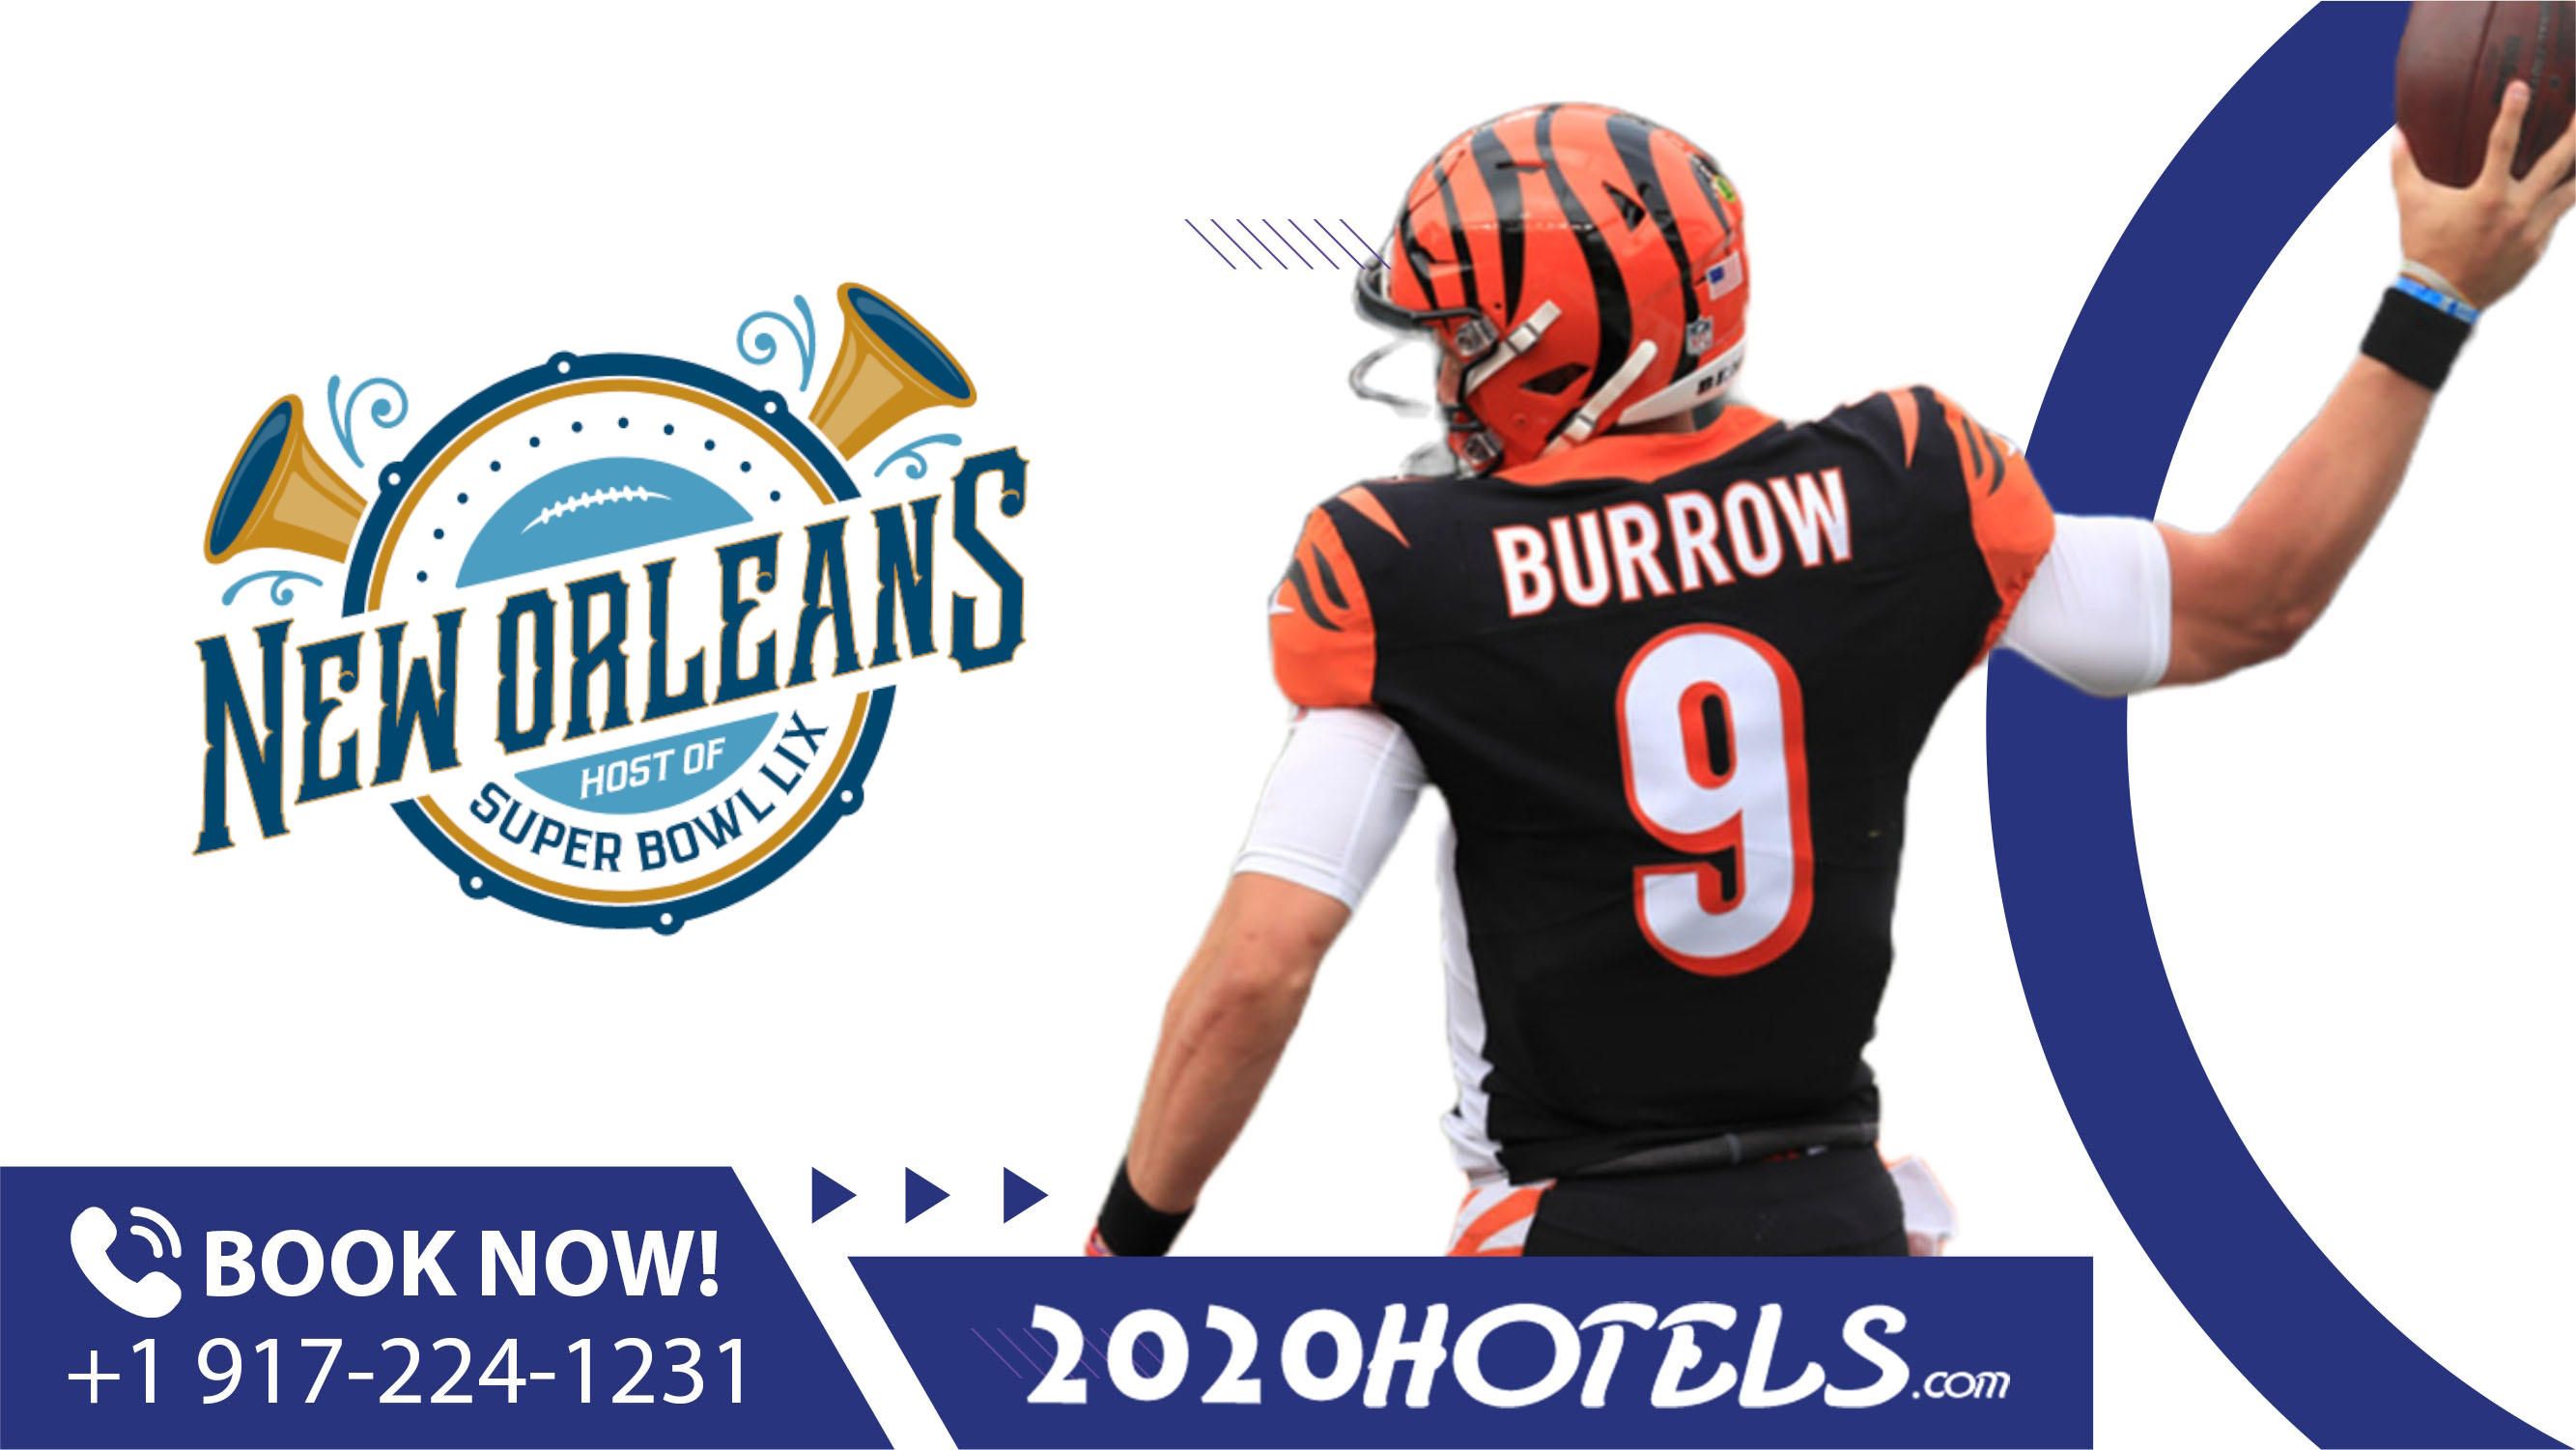 Click Here & Get Ready for Super Bowl LIX in New Orleans